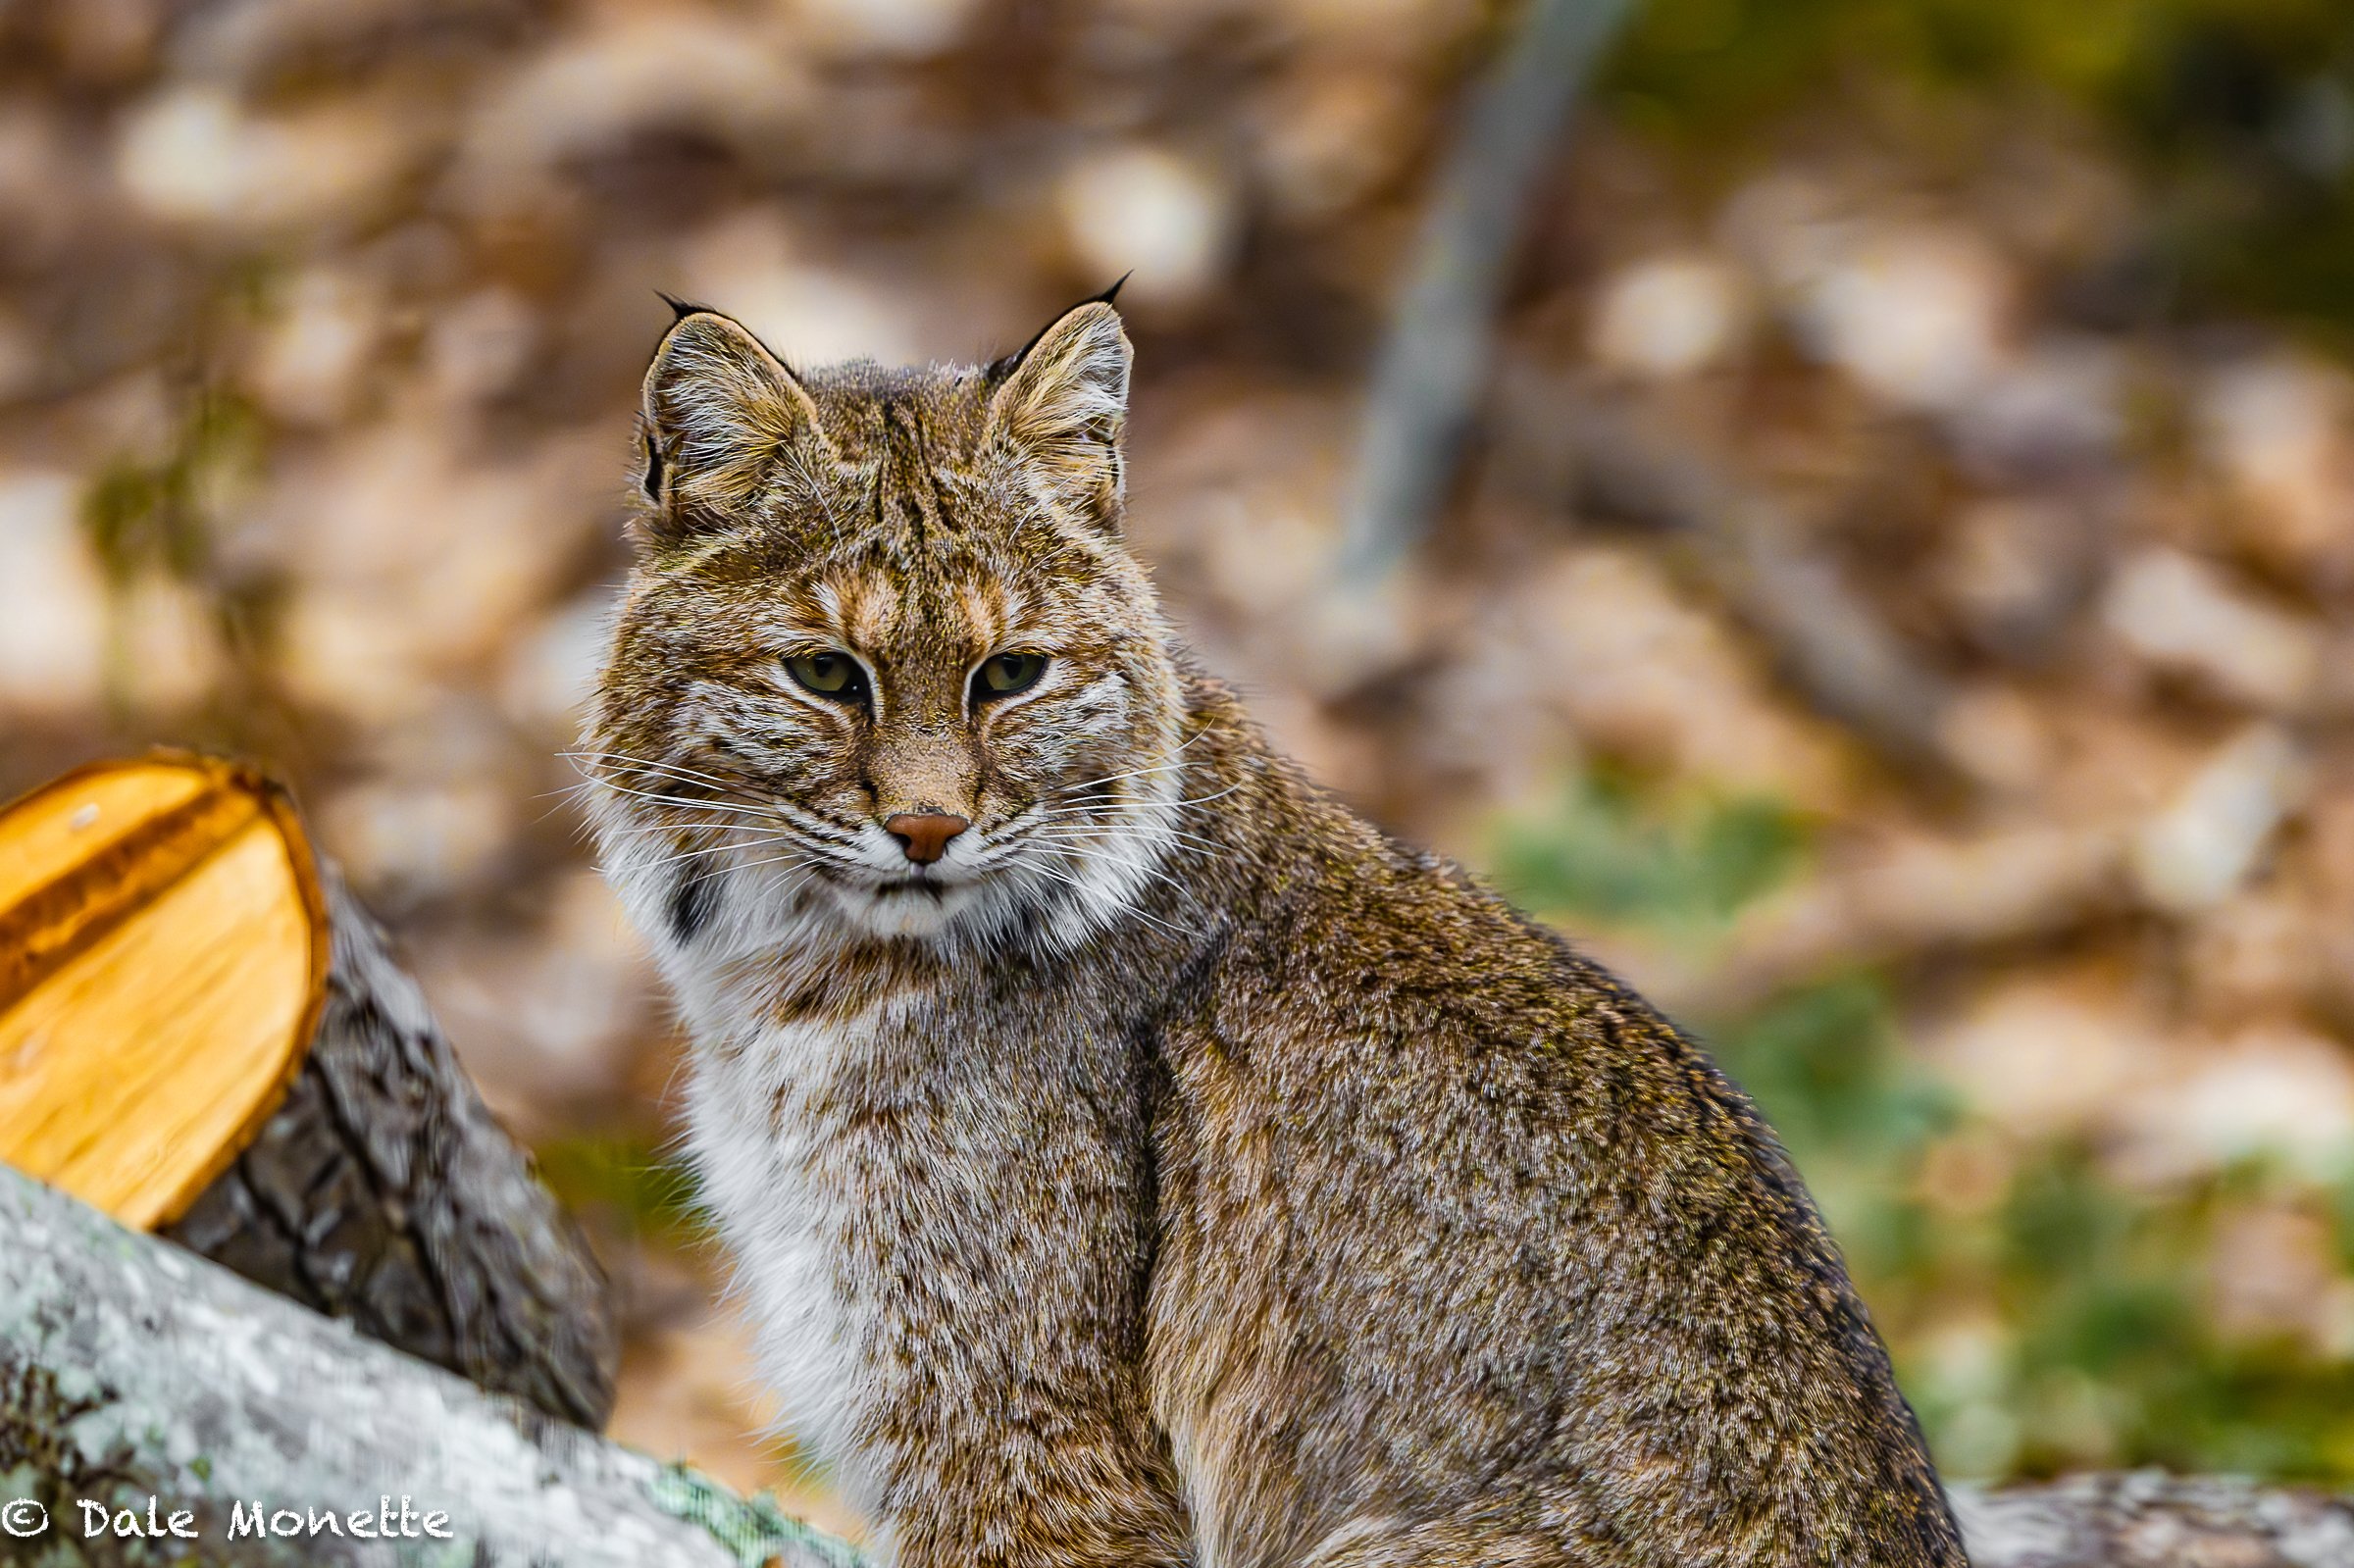   This bobcat image was taken with a 500 mm Nikon lens and camera from our kitchen window.  It was about 30 feet out in the yard sitting on a log pile. I only had the 500 in the house and it was too much!    